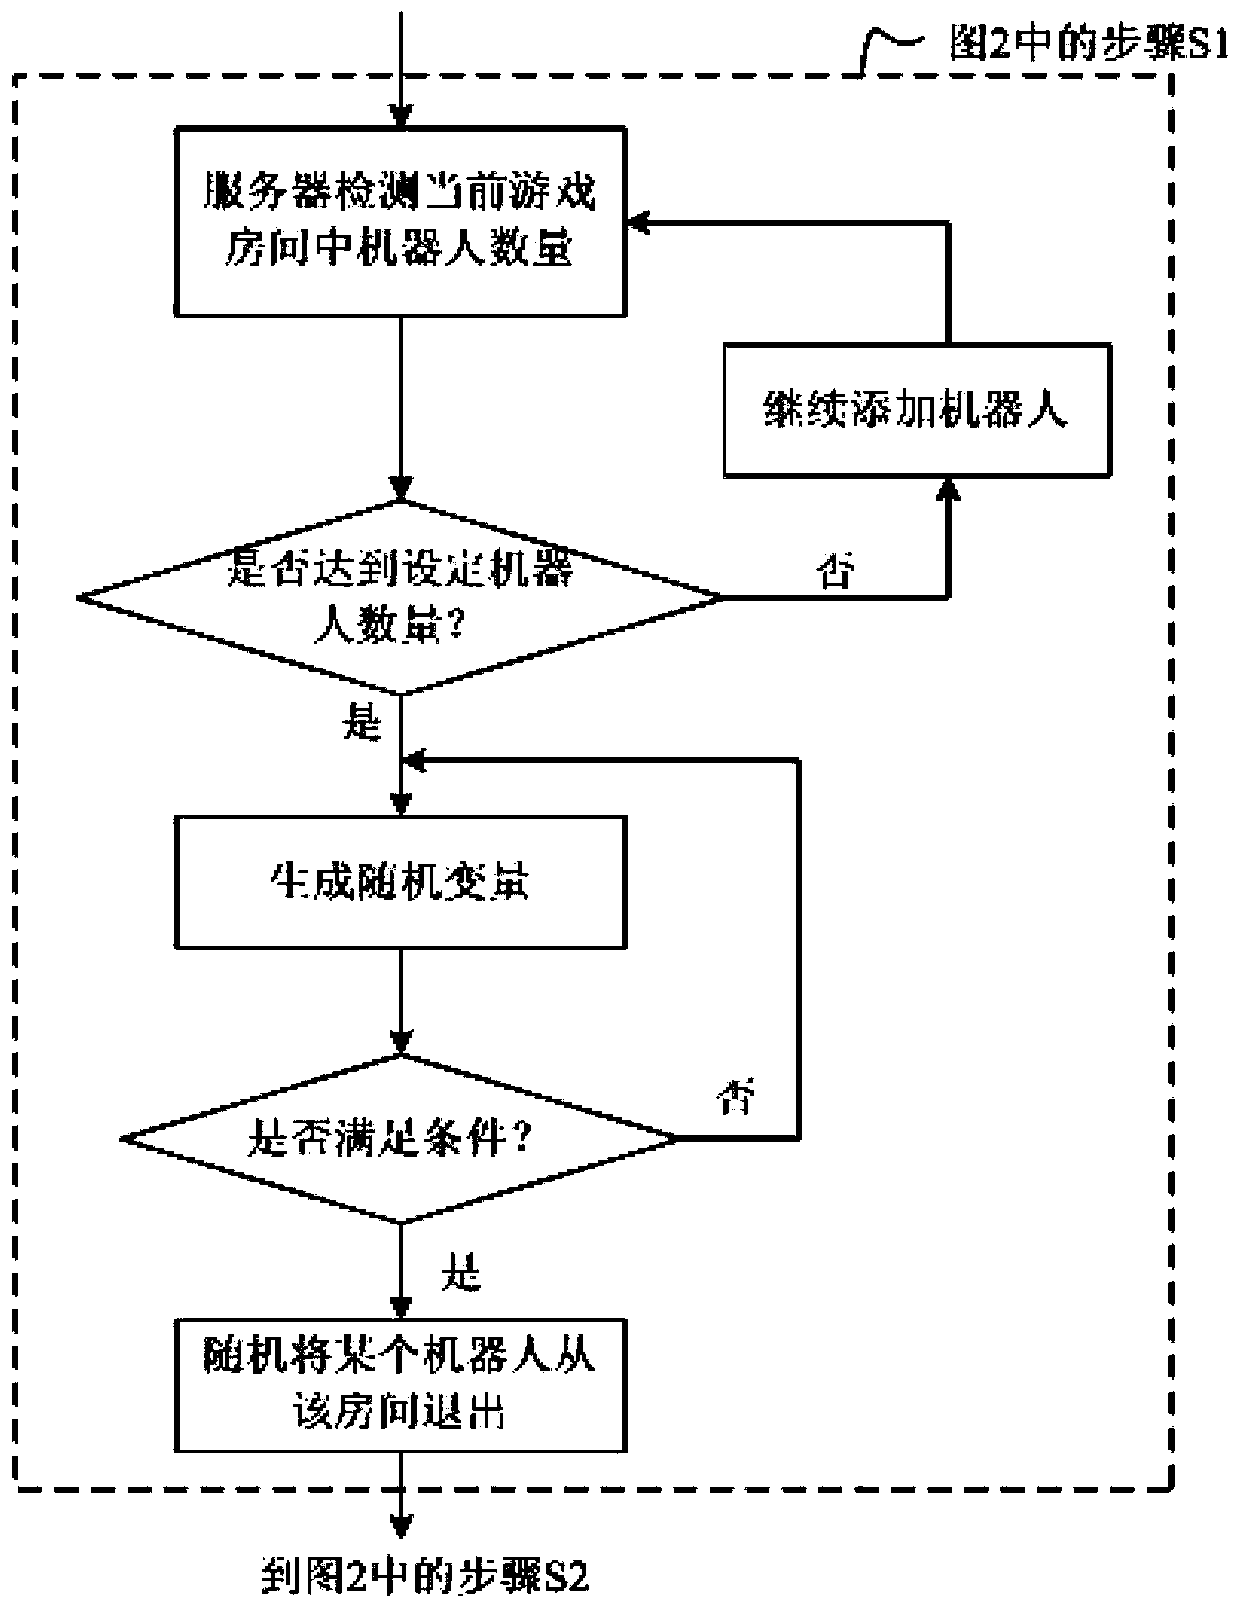 Online game system and method for implementing same